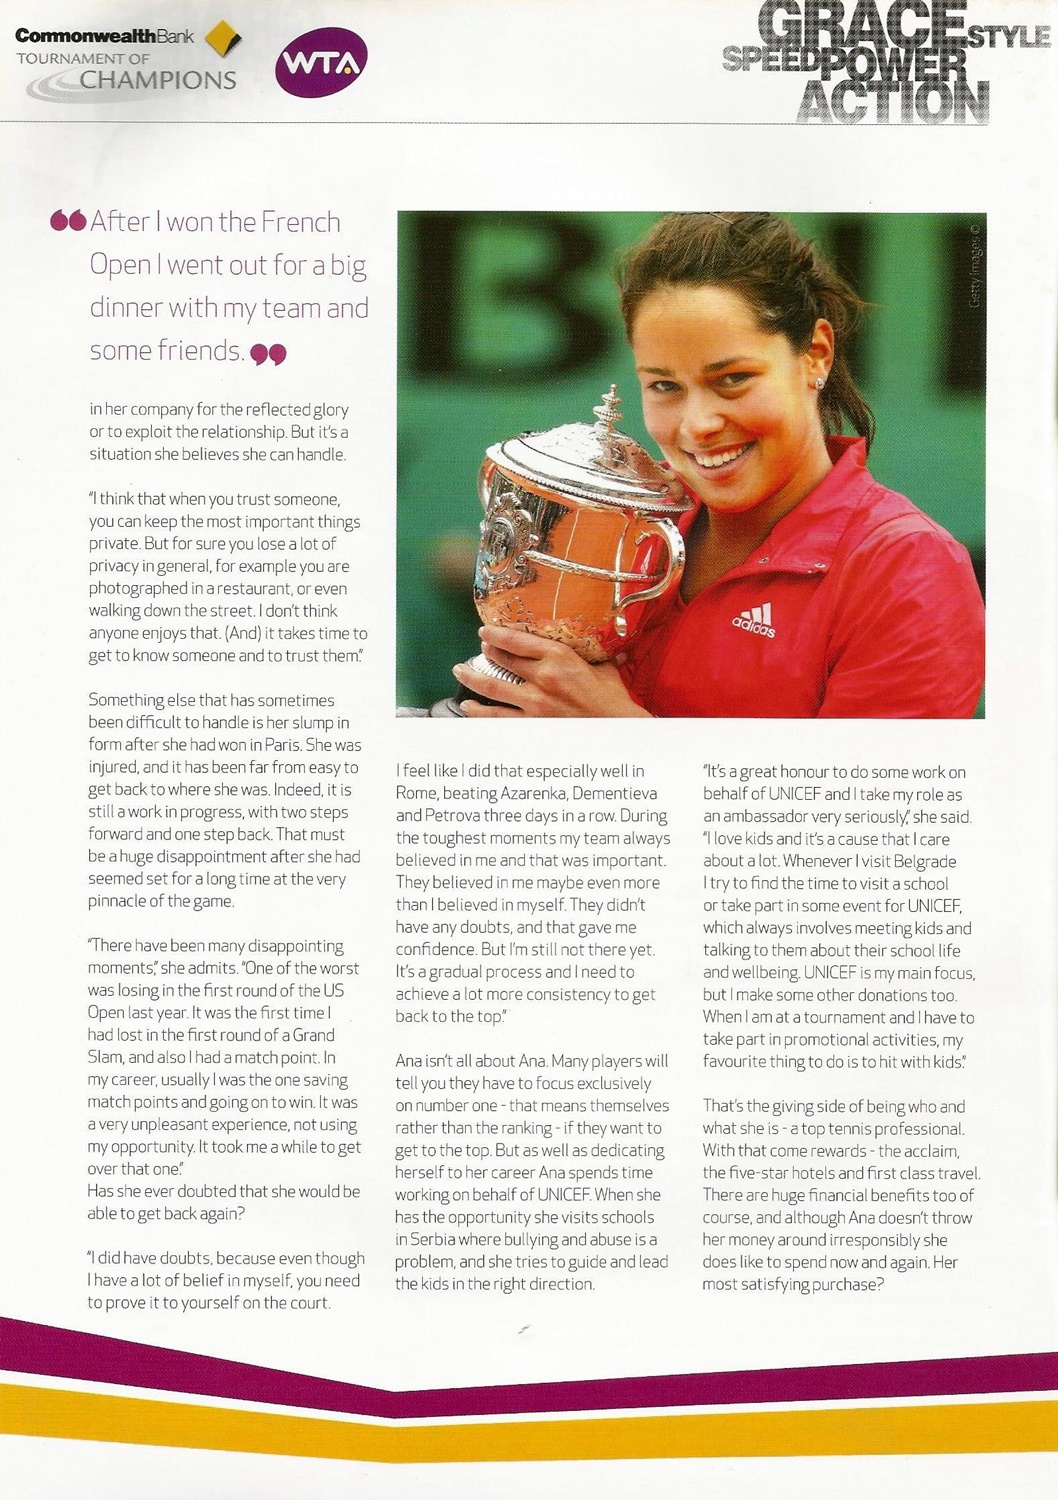 Ana Ivanovic the girl with the sunshine smile #3 by Barry Wood